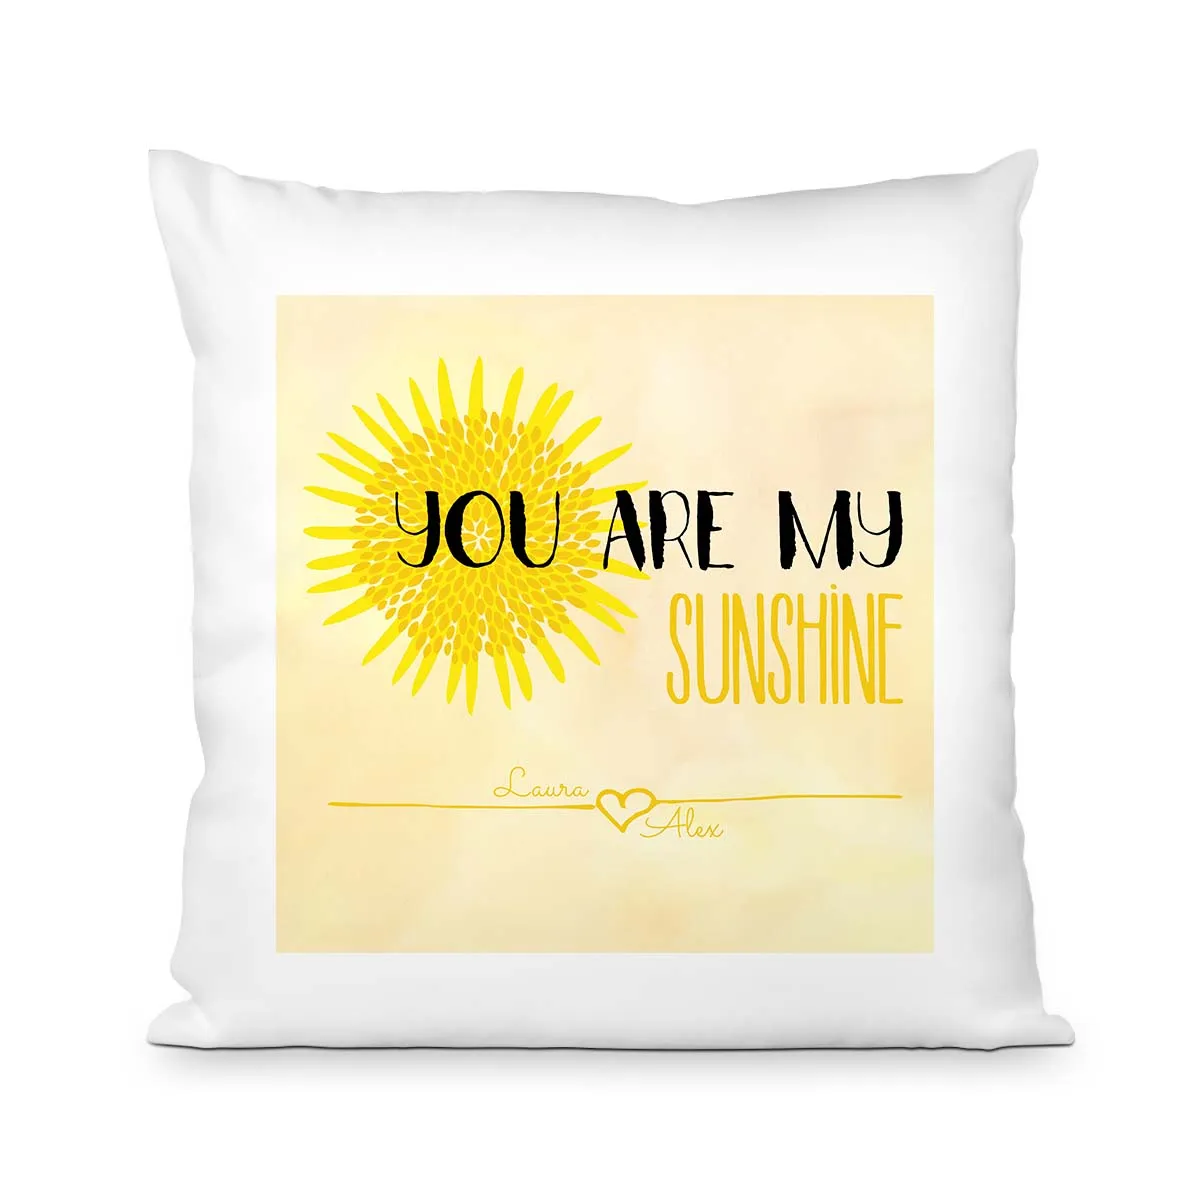 Personalisierbares Kissen - You Are My Sunshine